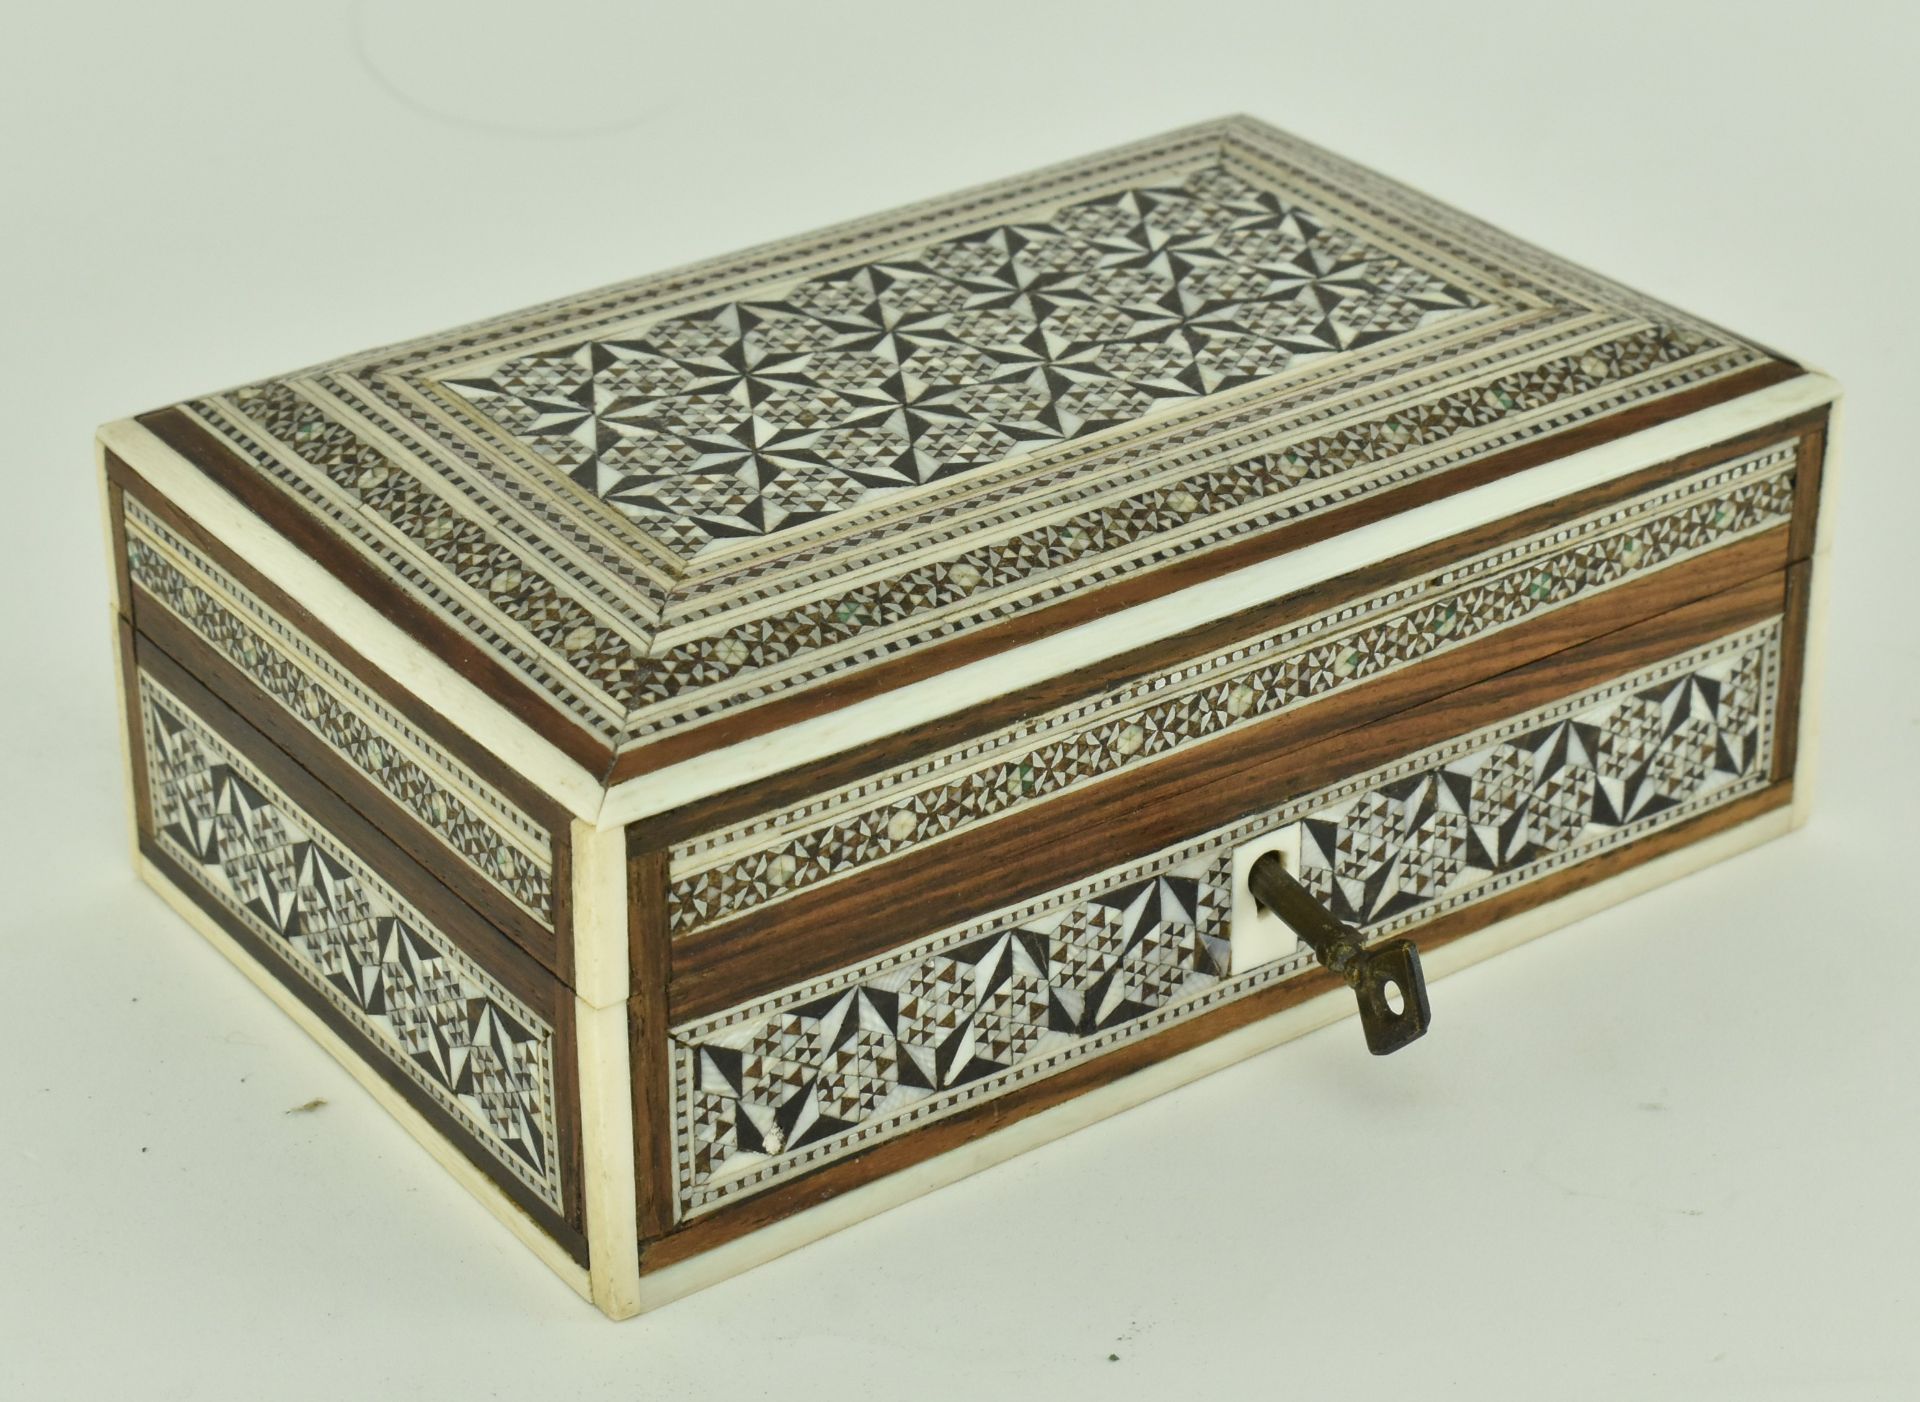 20TH CENTURY ISLAMIC WOODEN INLAY MARQUETRY BOX WITH KEY - Image 2 of 7